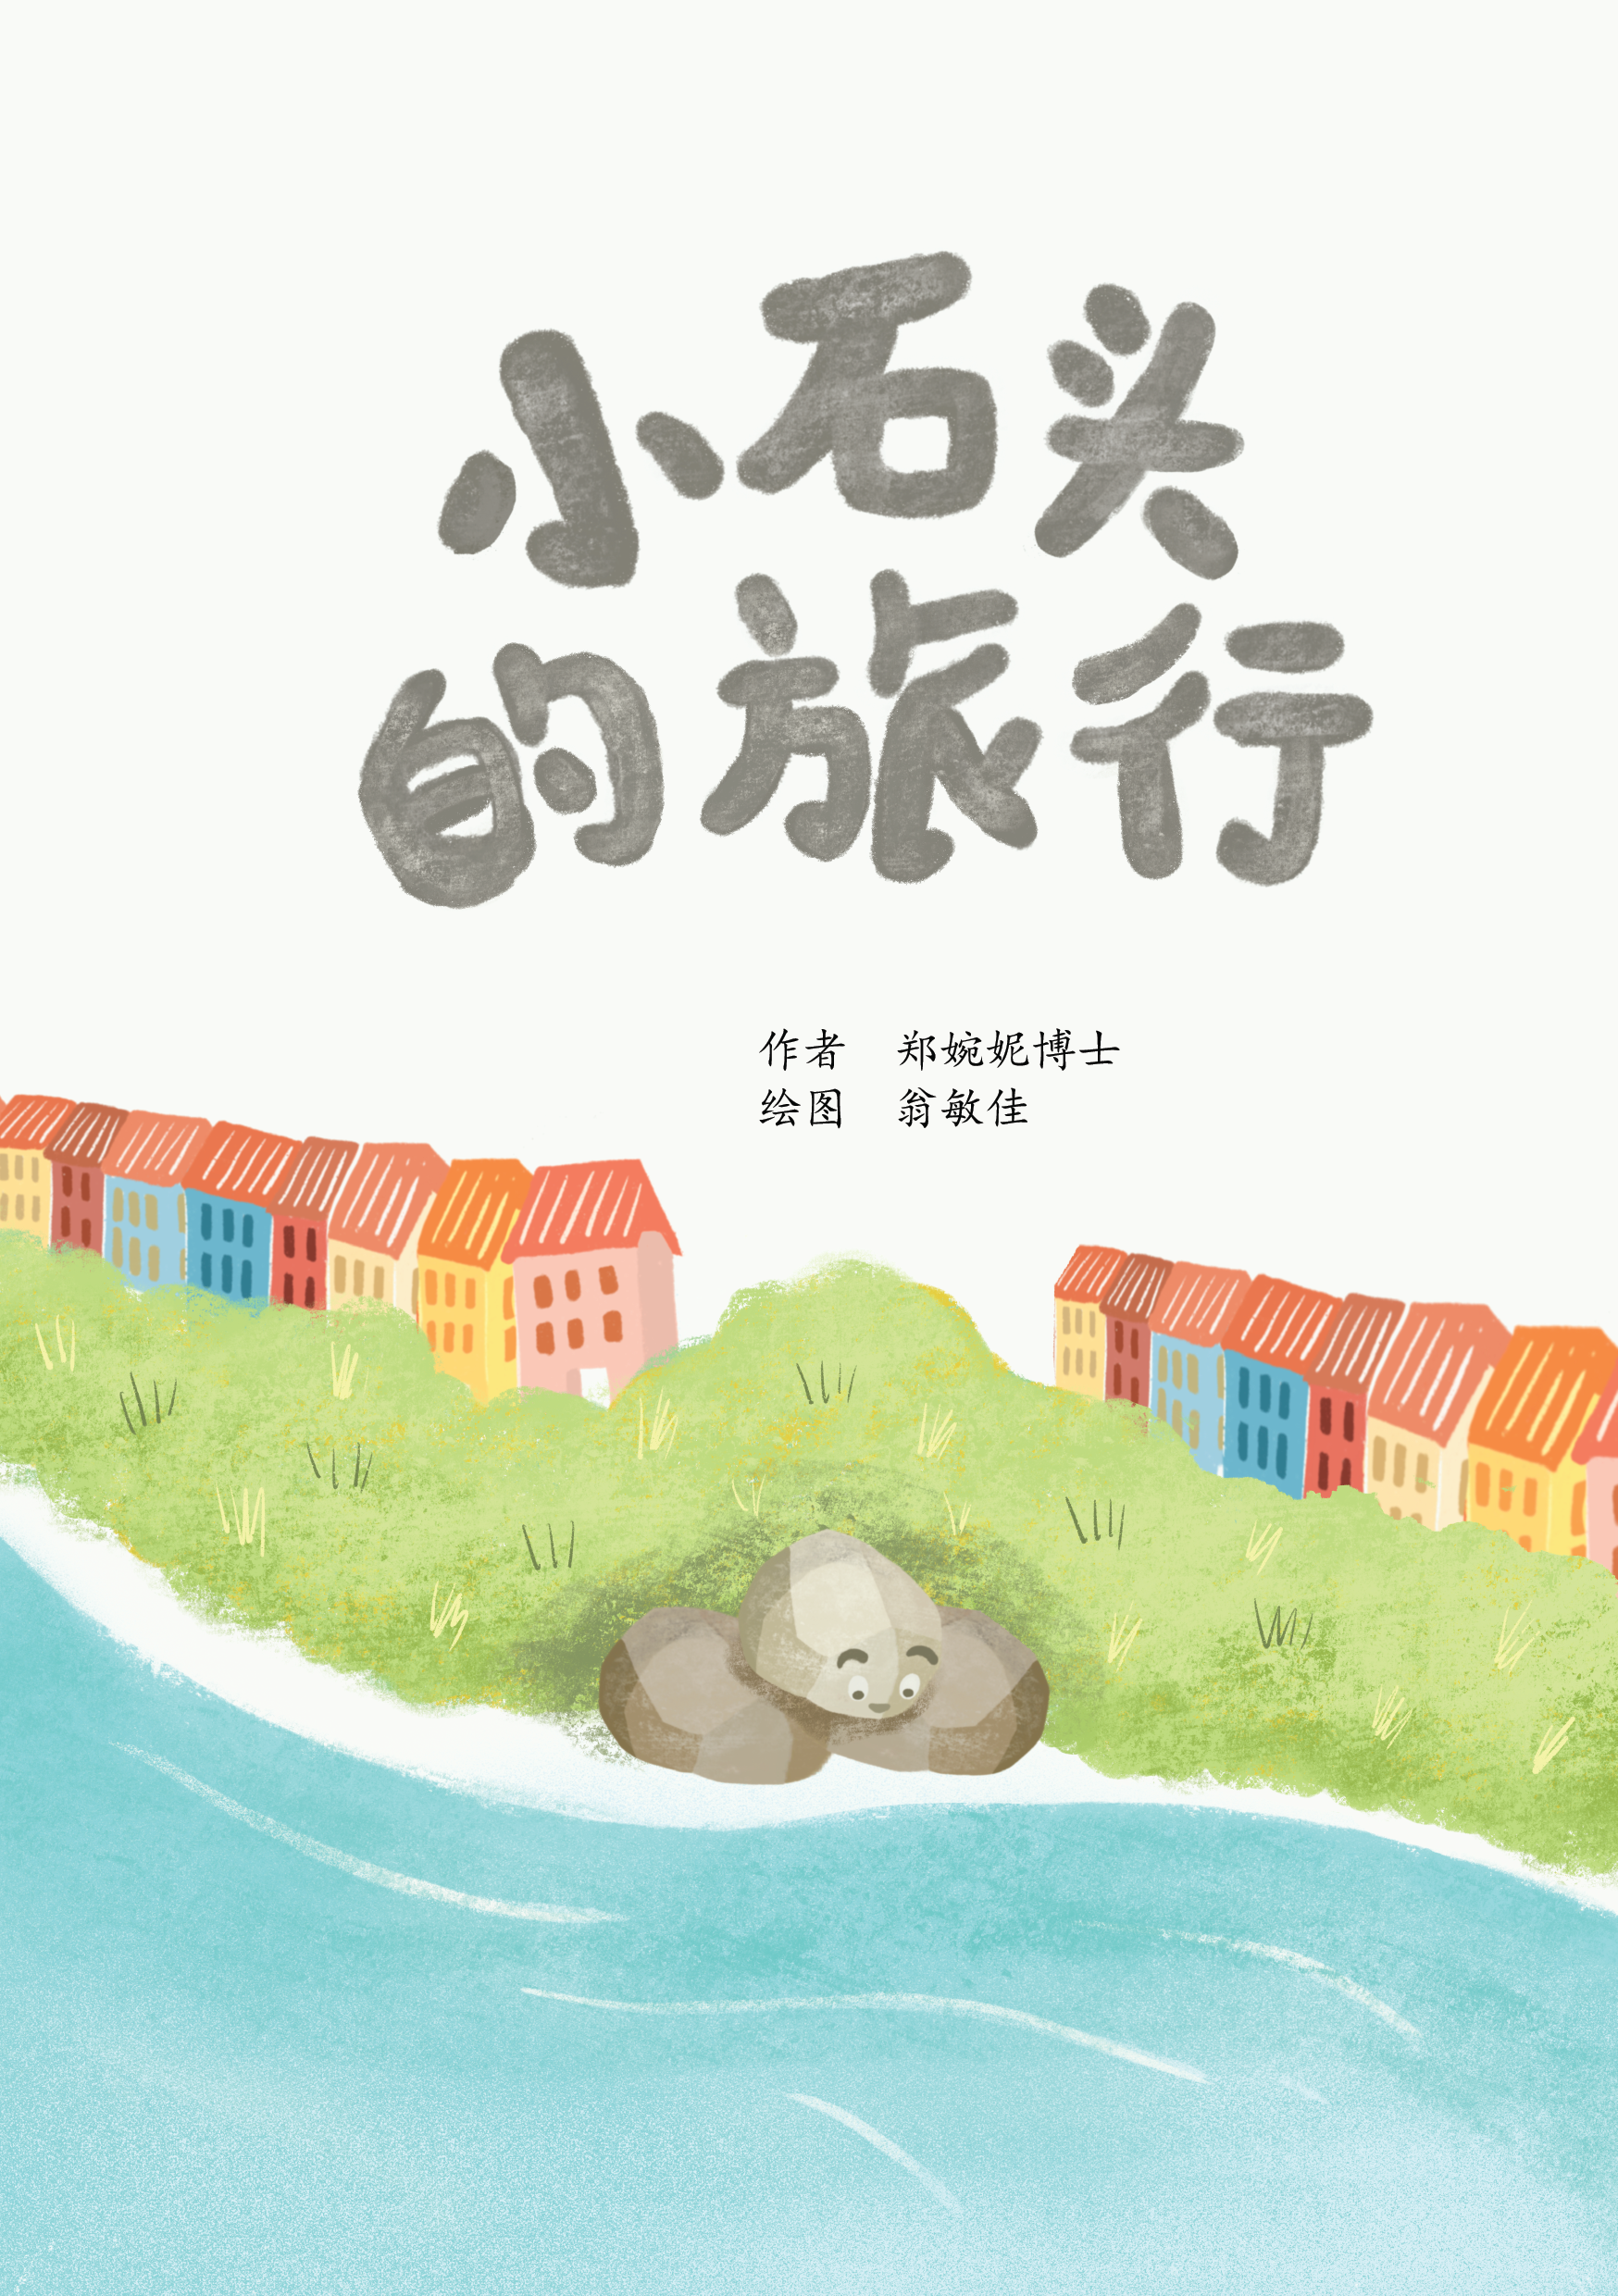 The Journey of Little Stone (小石头的旅行)